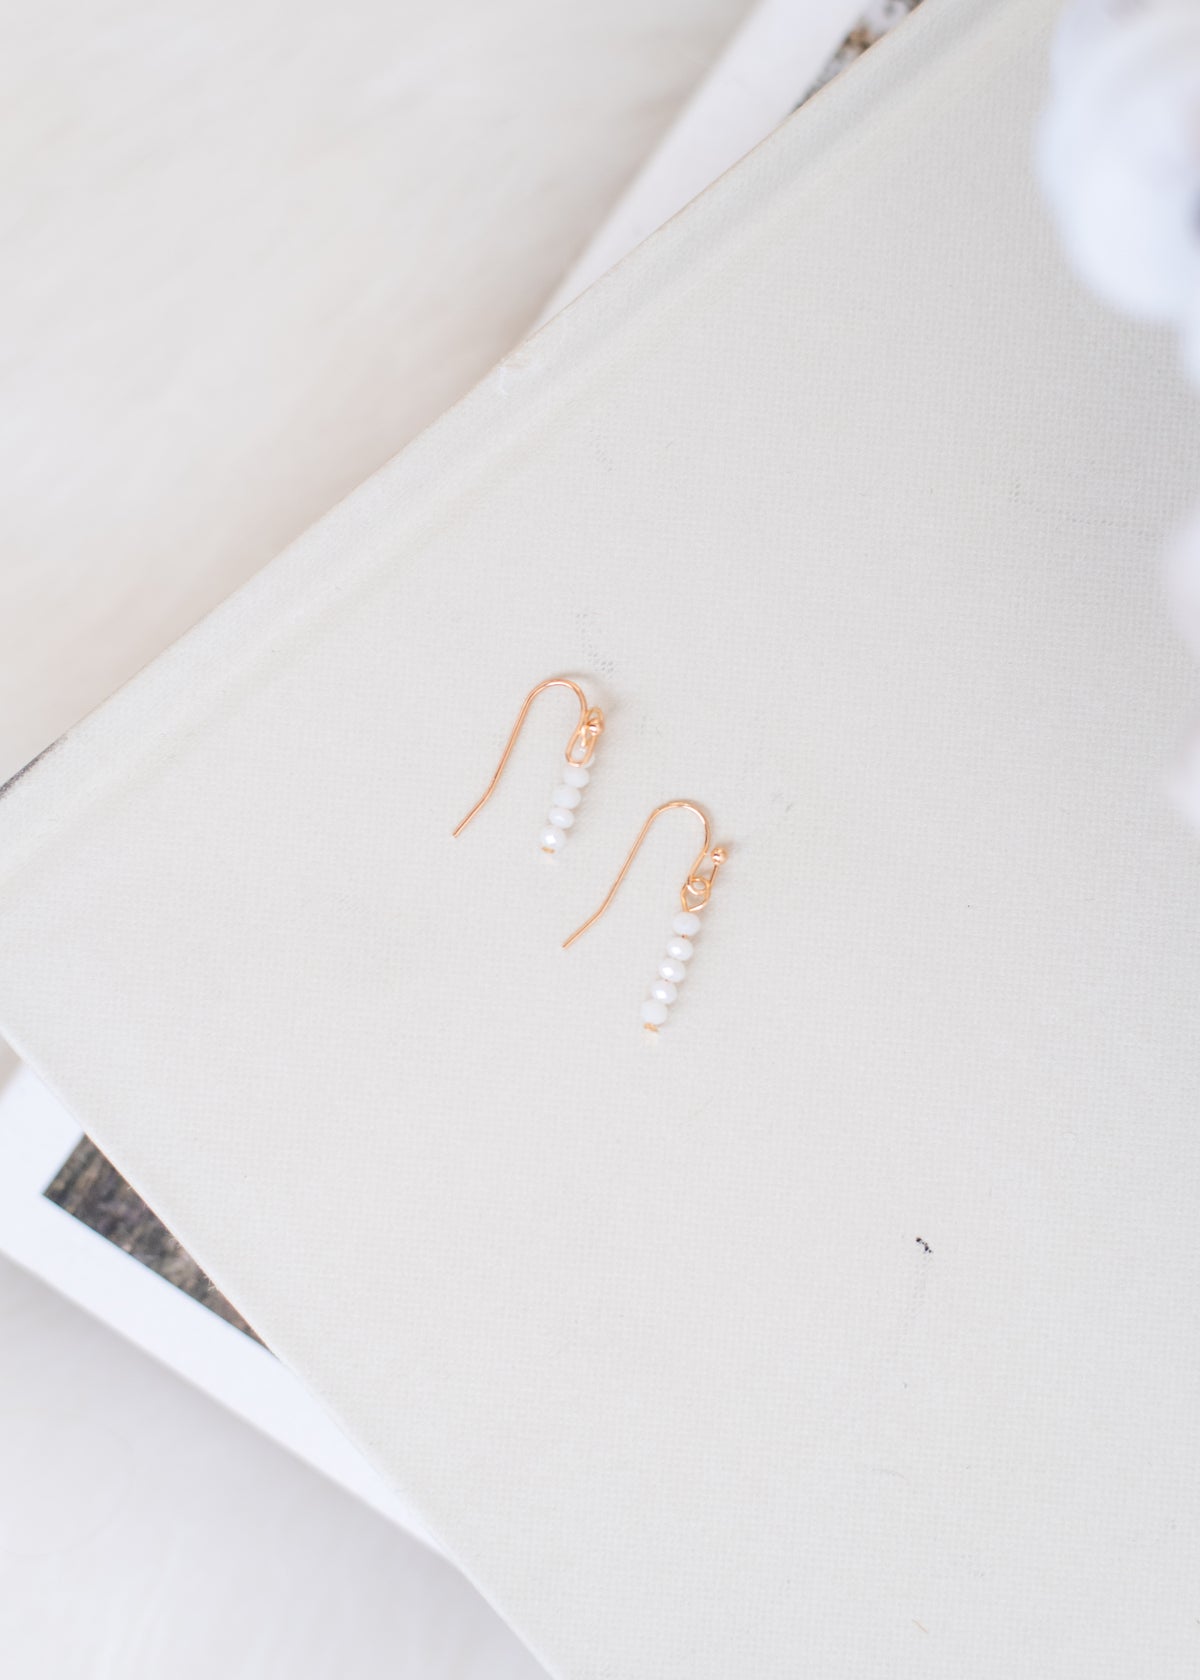 The Beaded Stacked Earrings